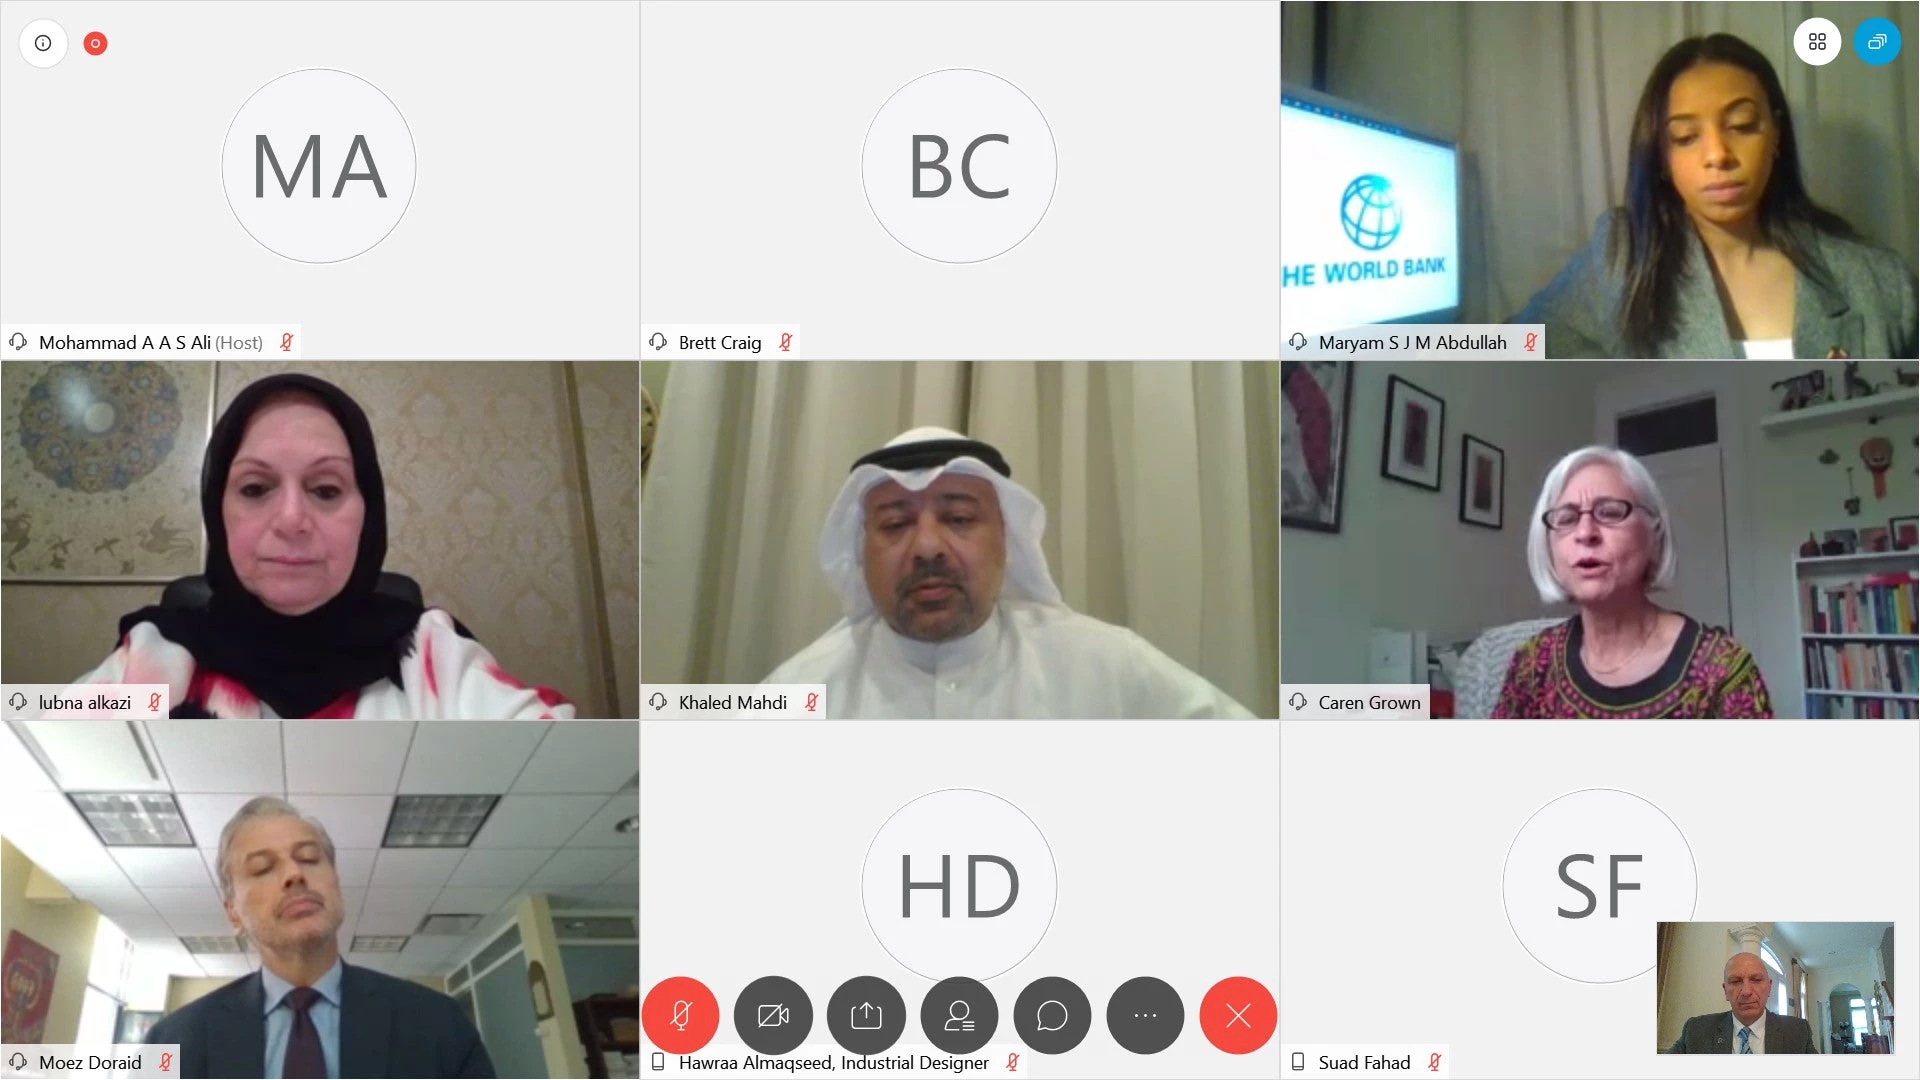 Photo of participants in virtual meeting during Ghabqa, Ramadan 2020 in Kuwait.